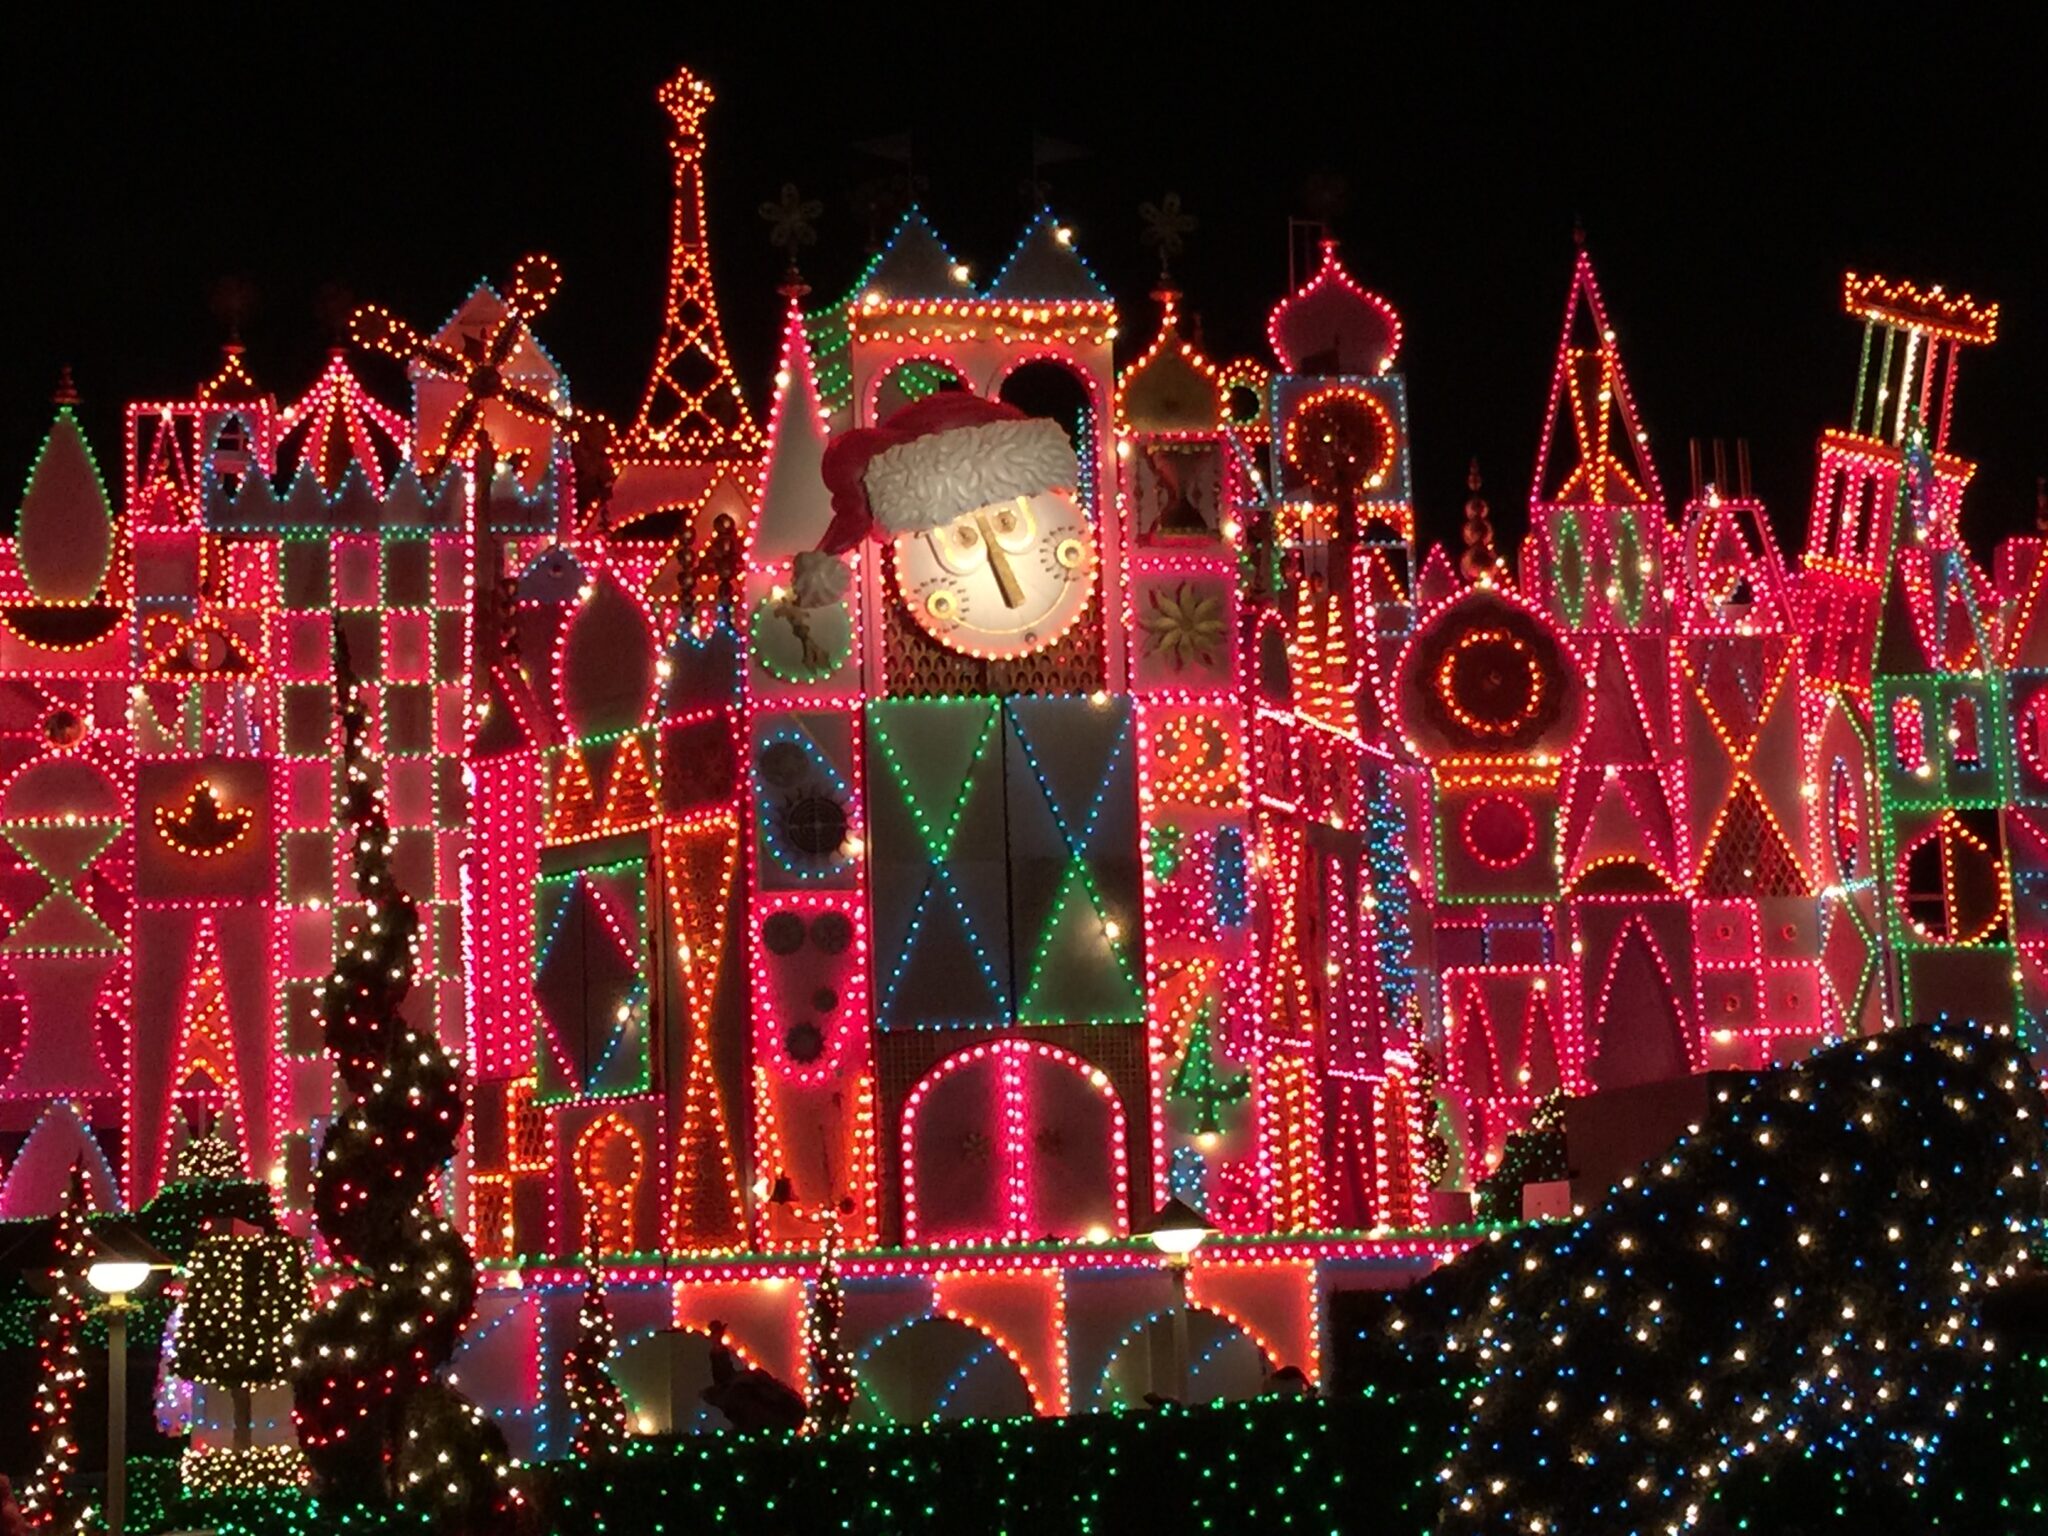 It’s A Small World Holiday After All: Christmastime at Disneyland